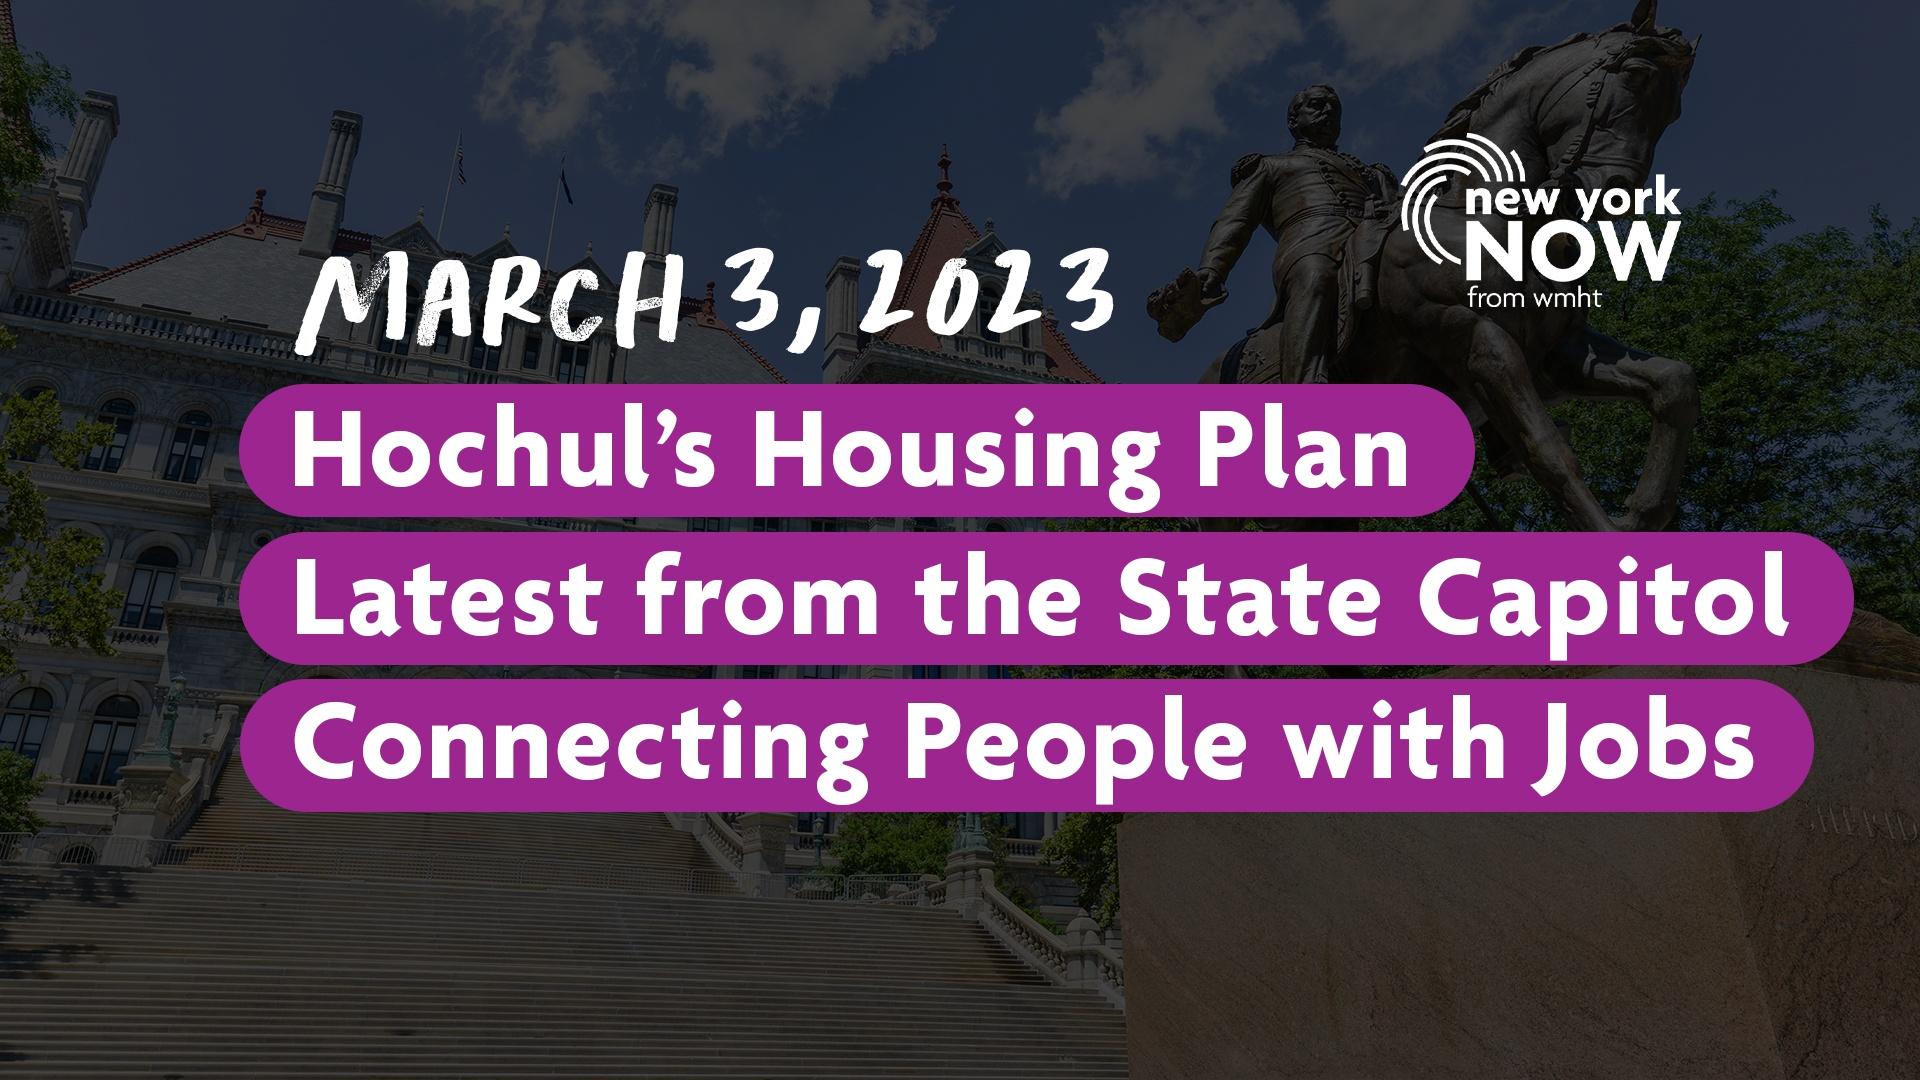 gov-hochul-s-housing-plan-jobs-training-and-more-updates-new-york